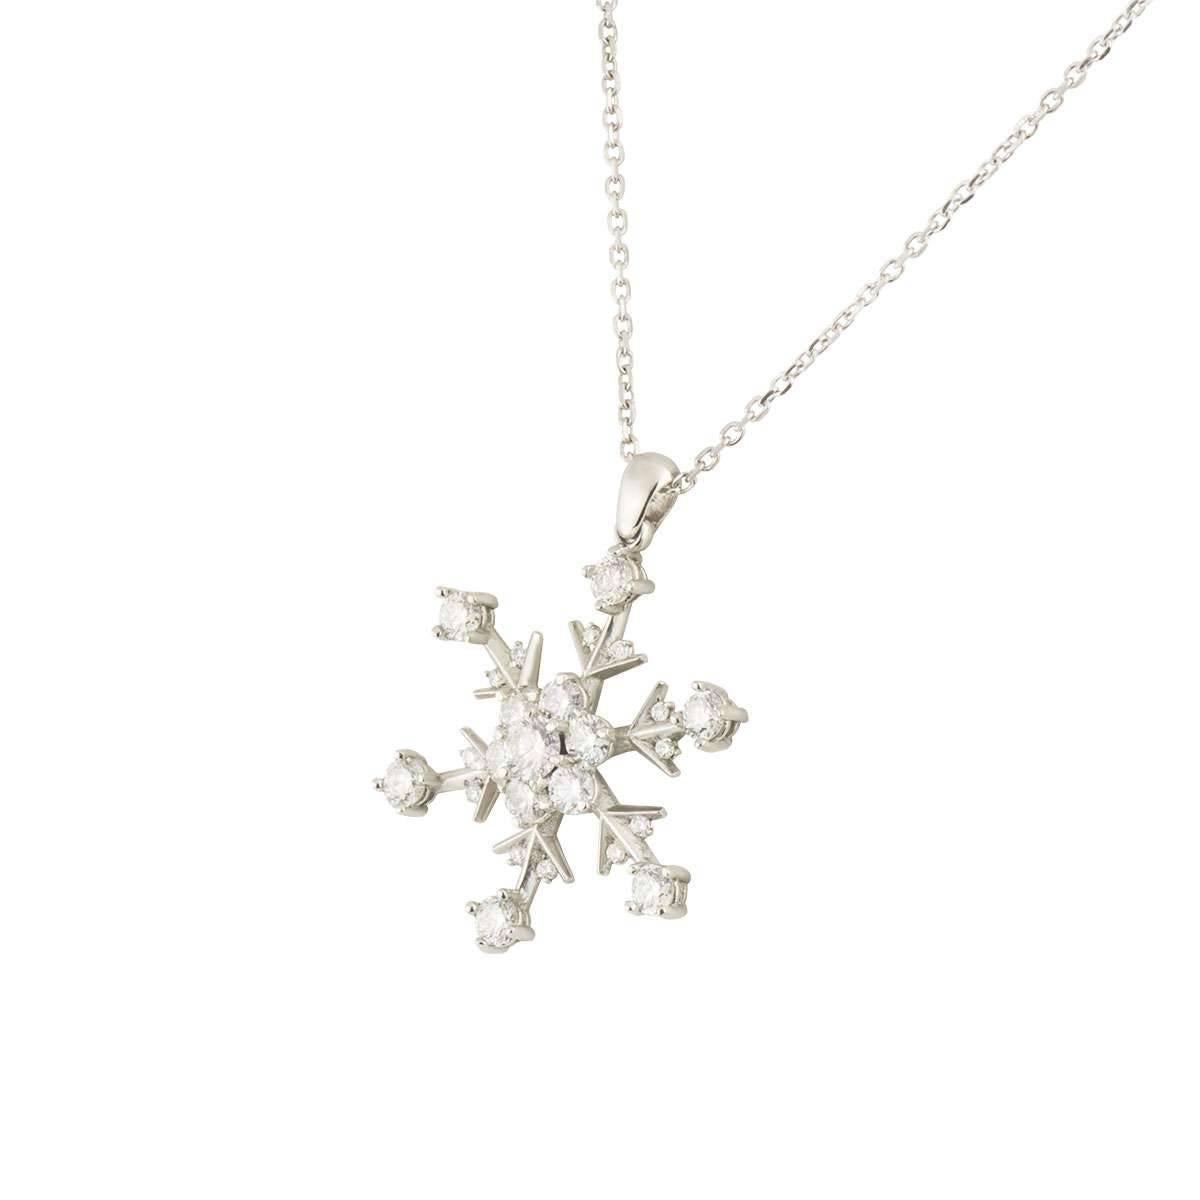 A beautiful platinum diamond pendant. The pendant comprises of a snowflake motif featuring a round brilliant cut diamond in the centre with a halo of diamonds, complemented with round brilliant cut diamonds set to the outer edges of the snowflake